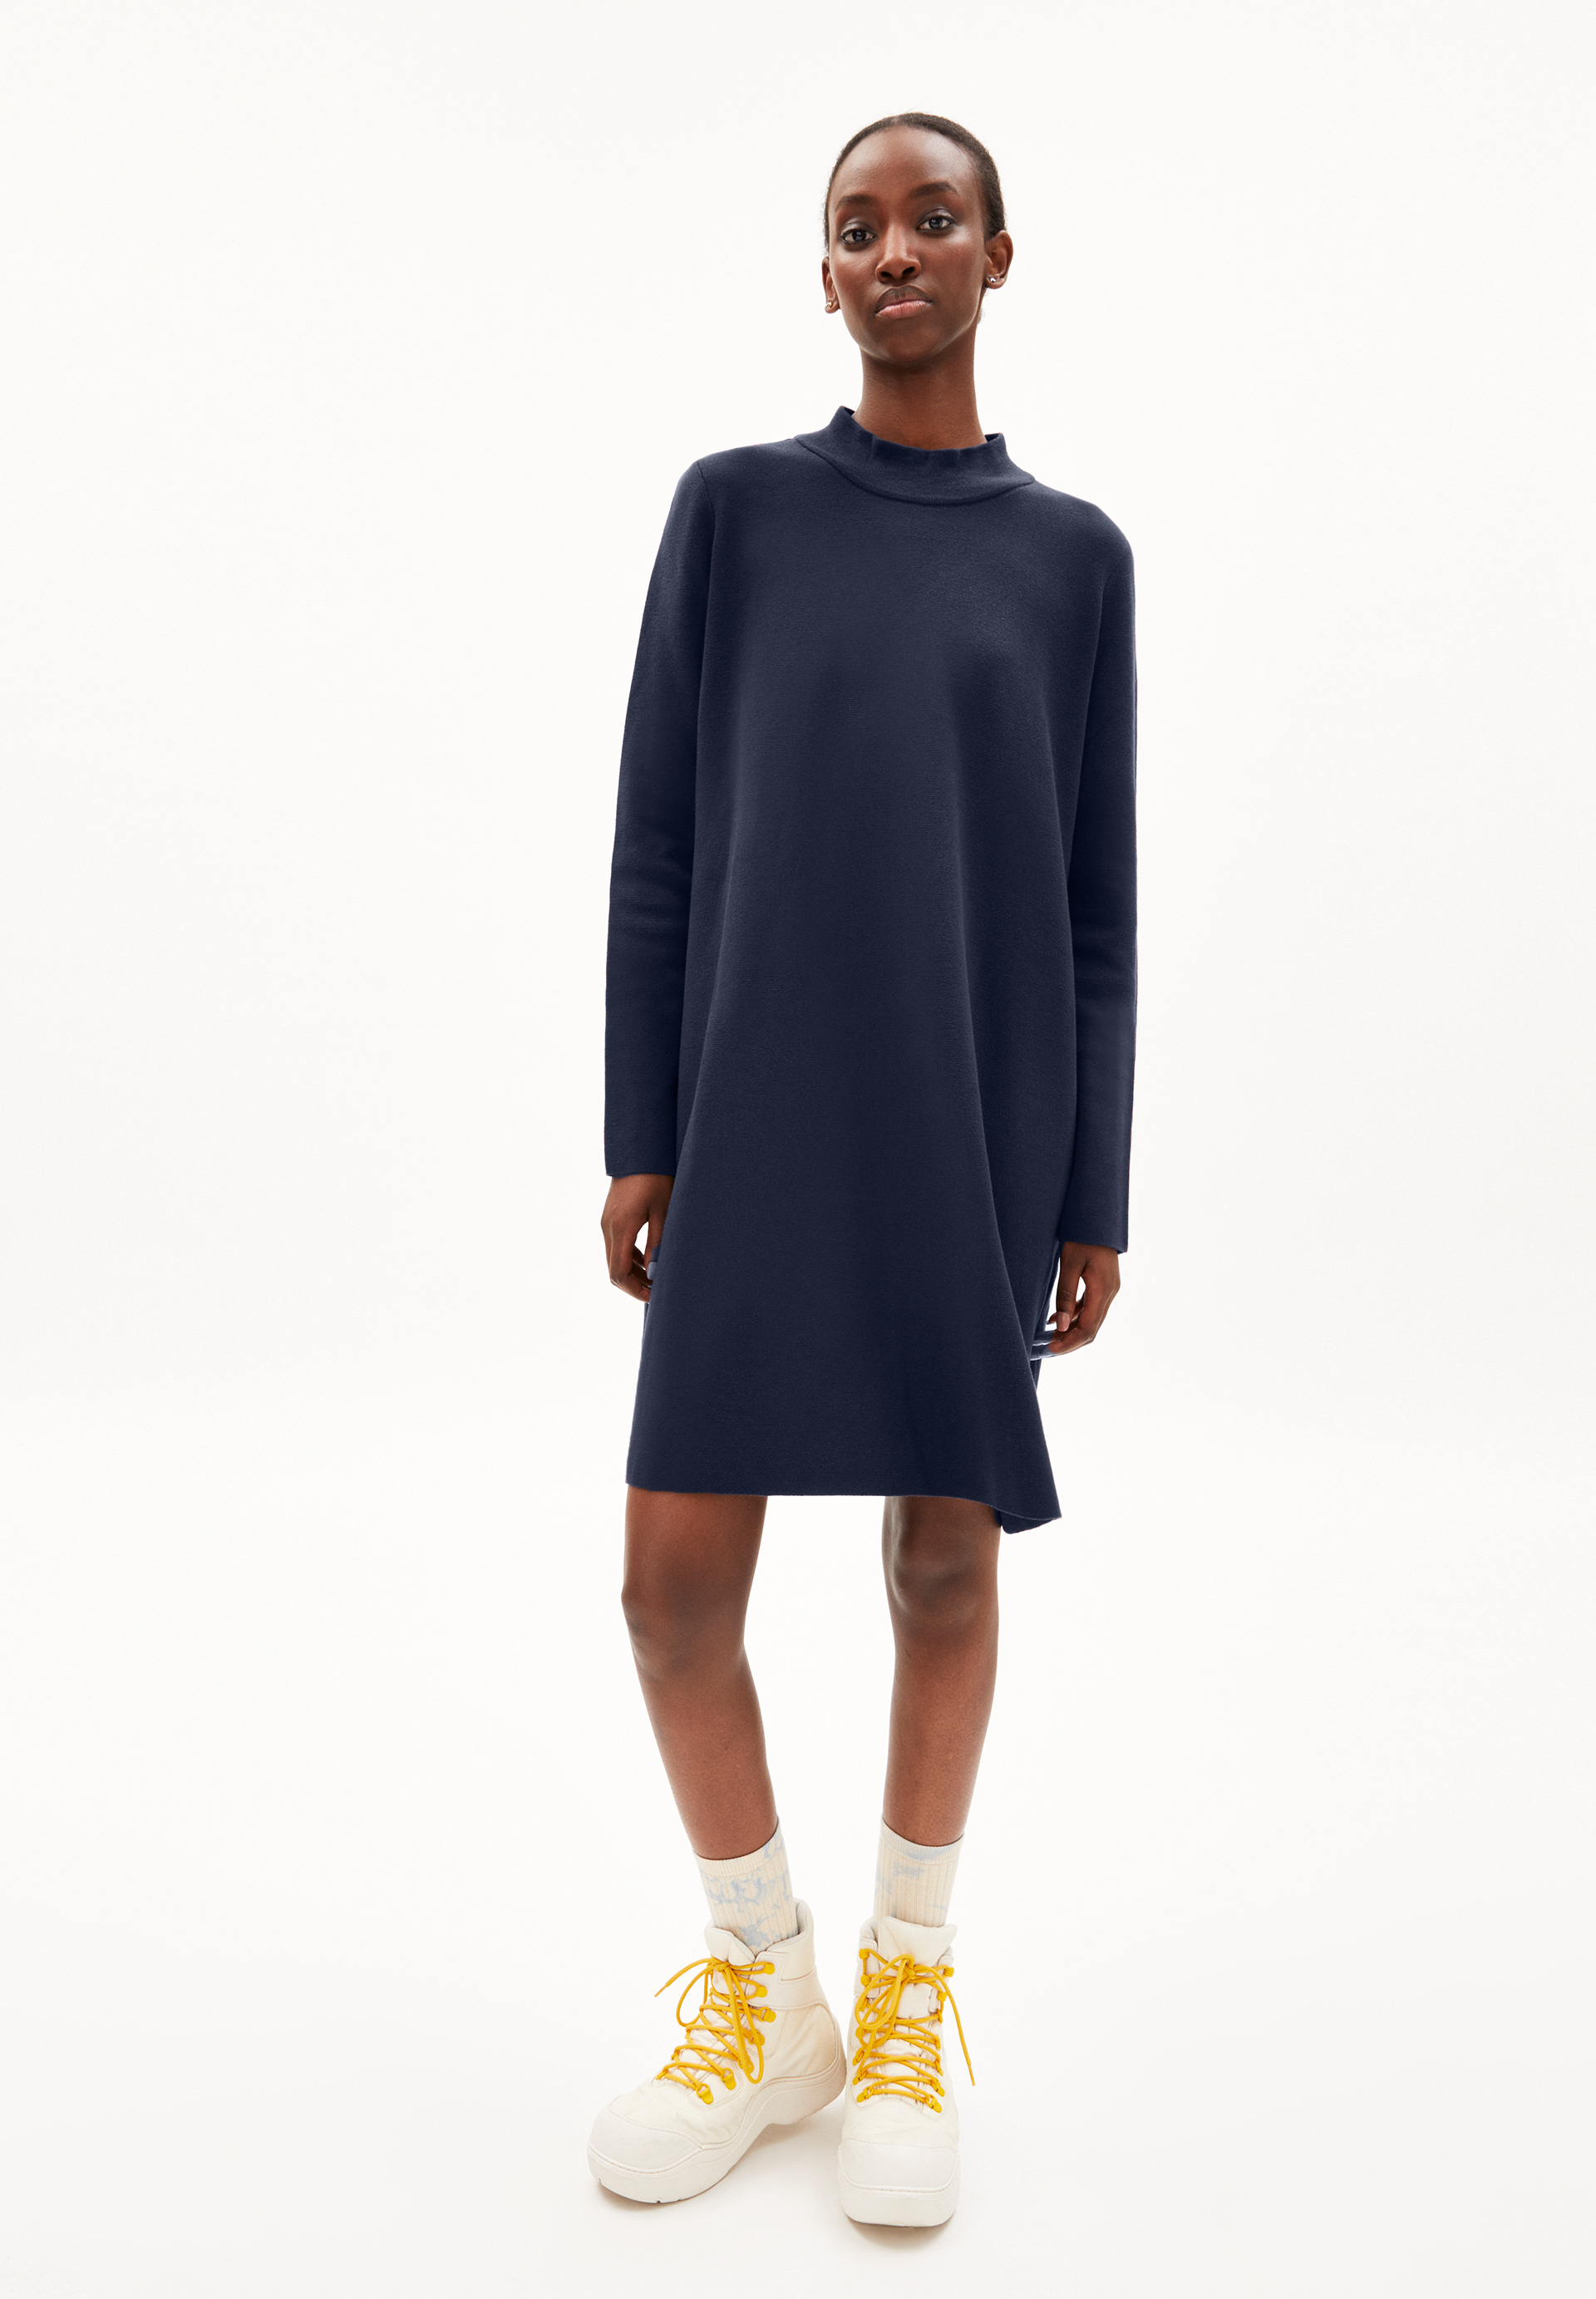 FRIADAA Knit Dress Relaxed Fit made of Organic Cotton